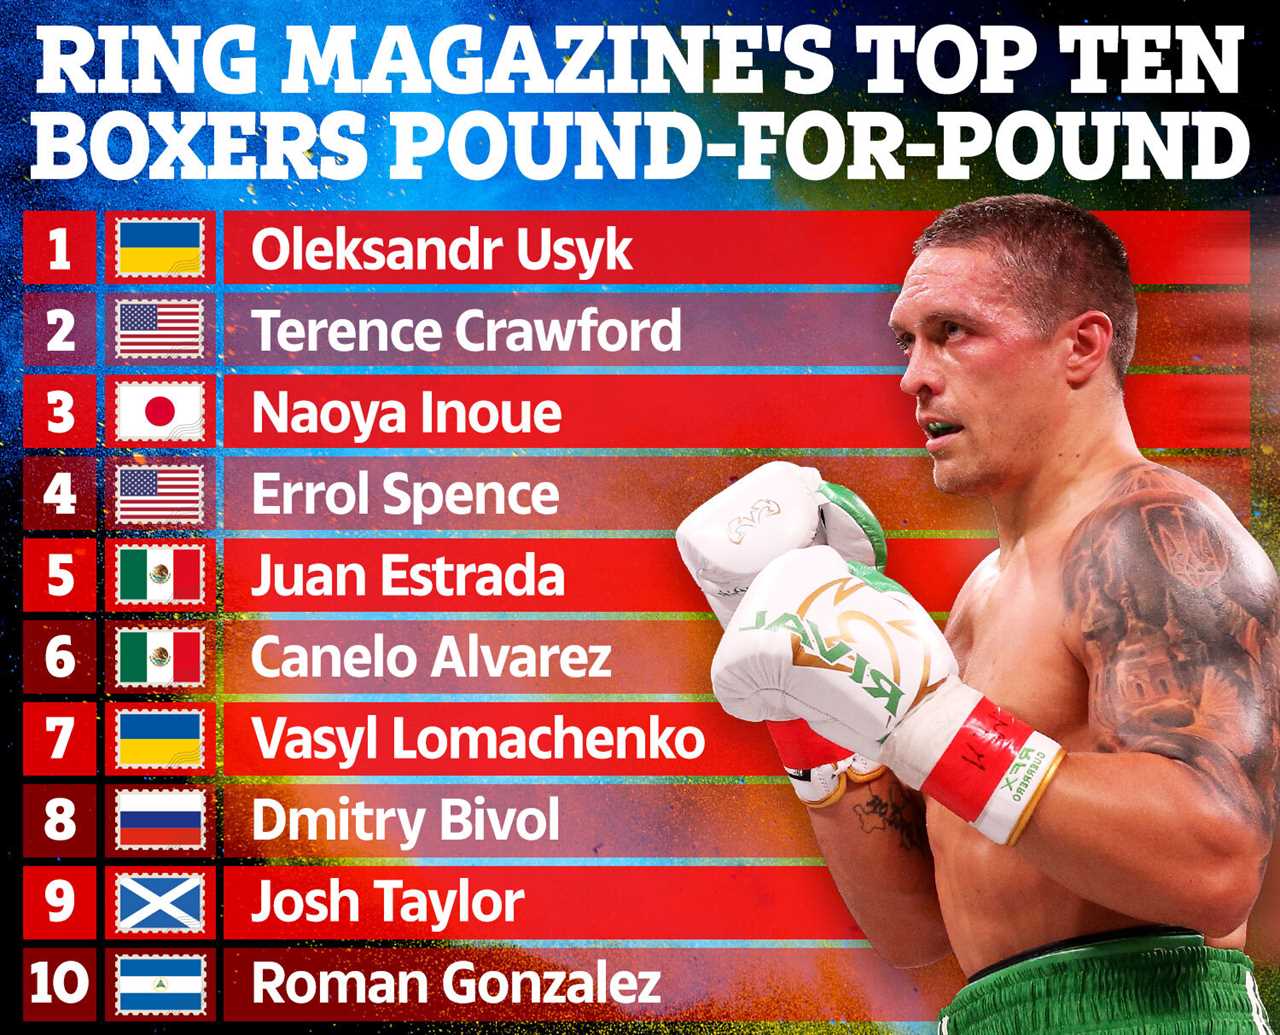 Ring Magazine's Top 10 Boxers for Pounds revealed the Canelo dropping down on the list and NO Tyson Fury